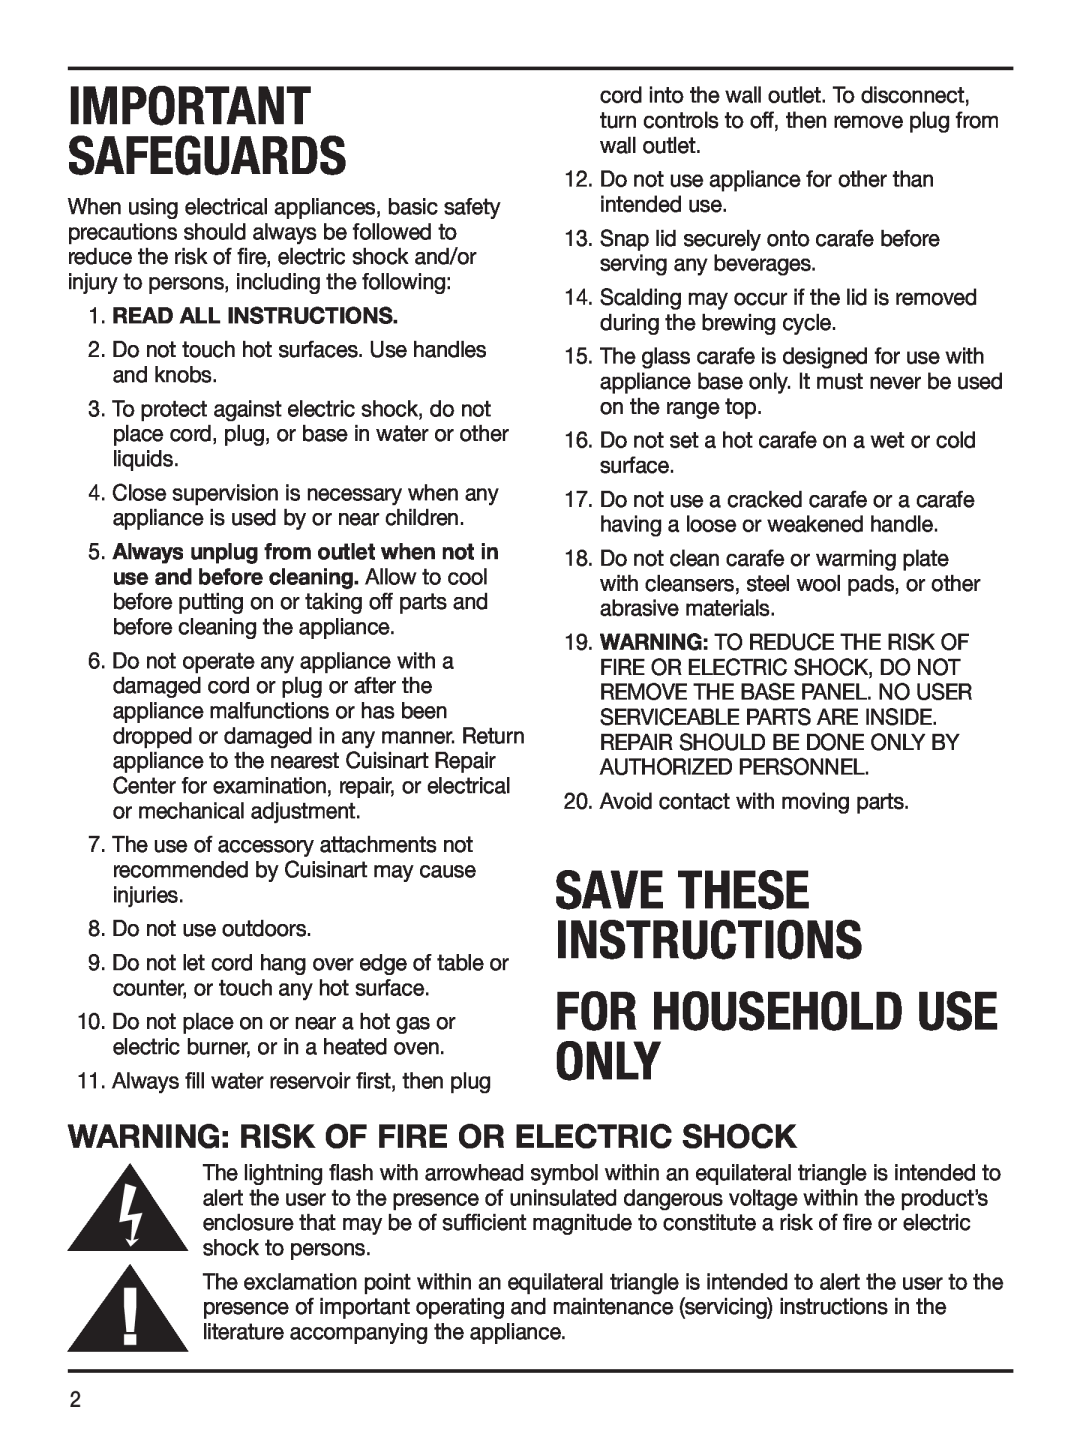 Cuisinart 07CU26075 Safeguards, For Household Use Only, Save These Instructions, Warning Risk Of Fire Or Electric Shock 